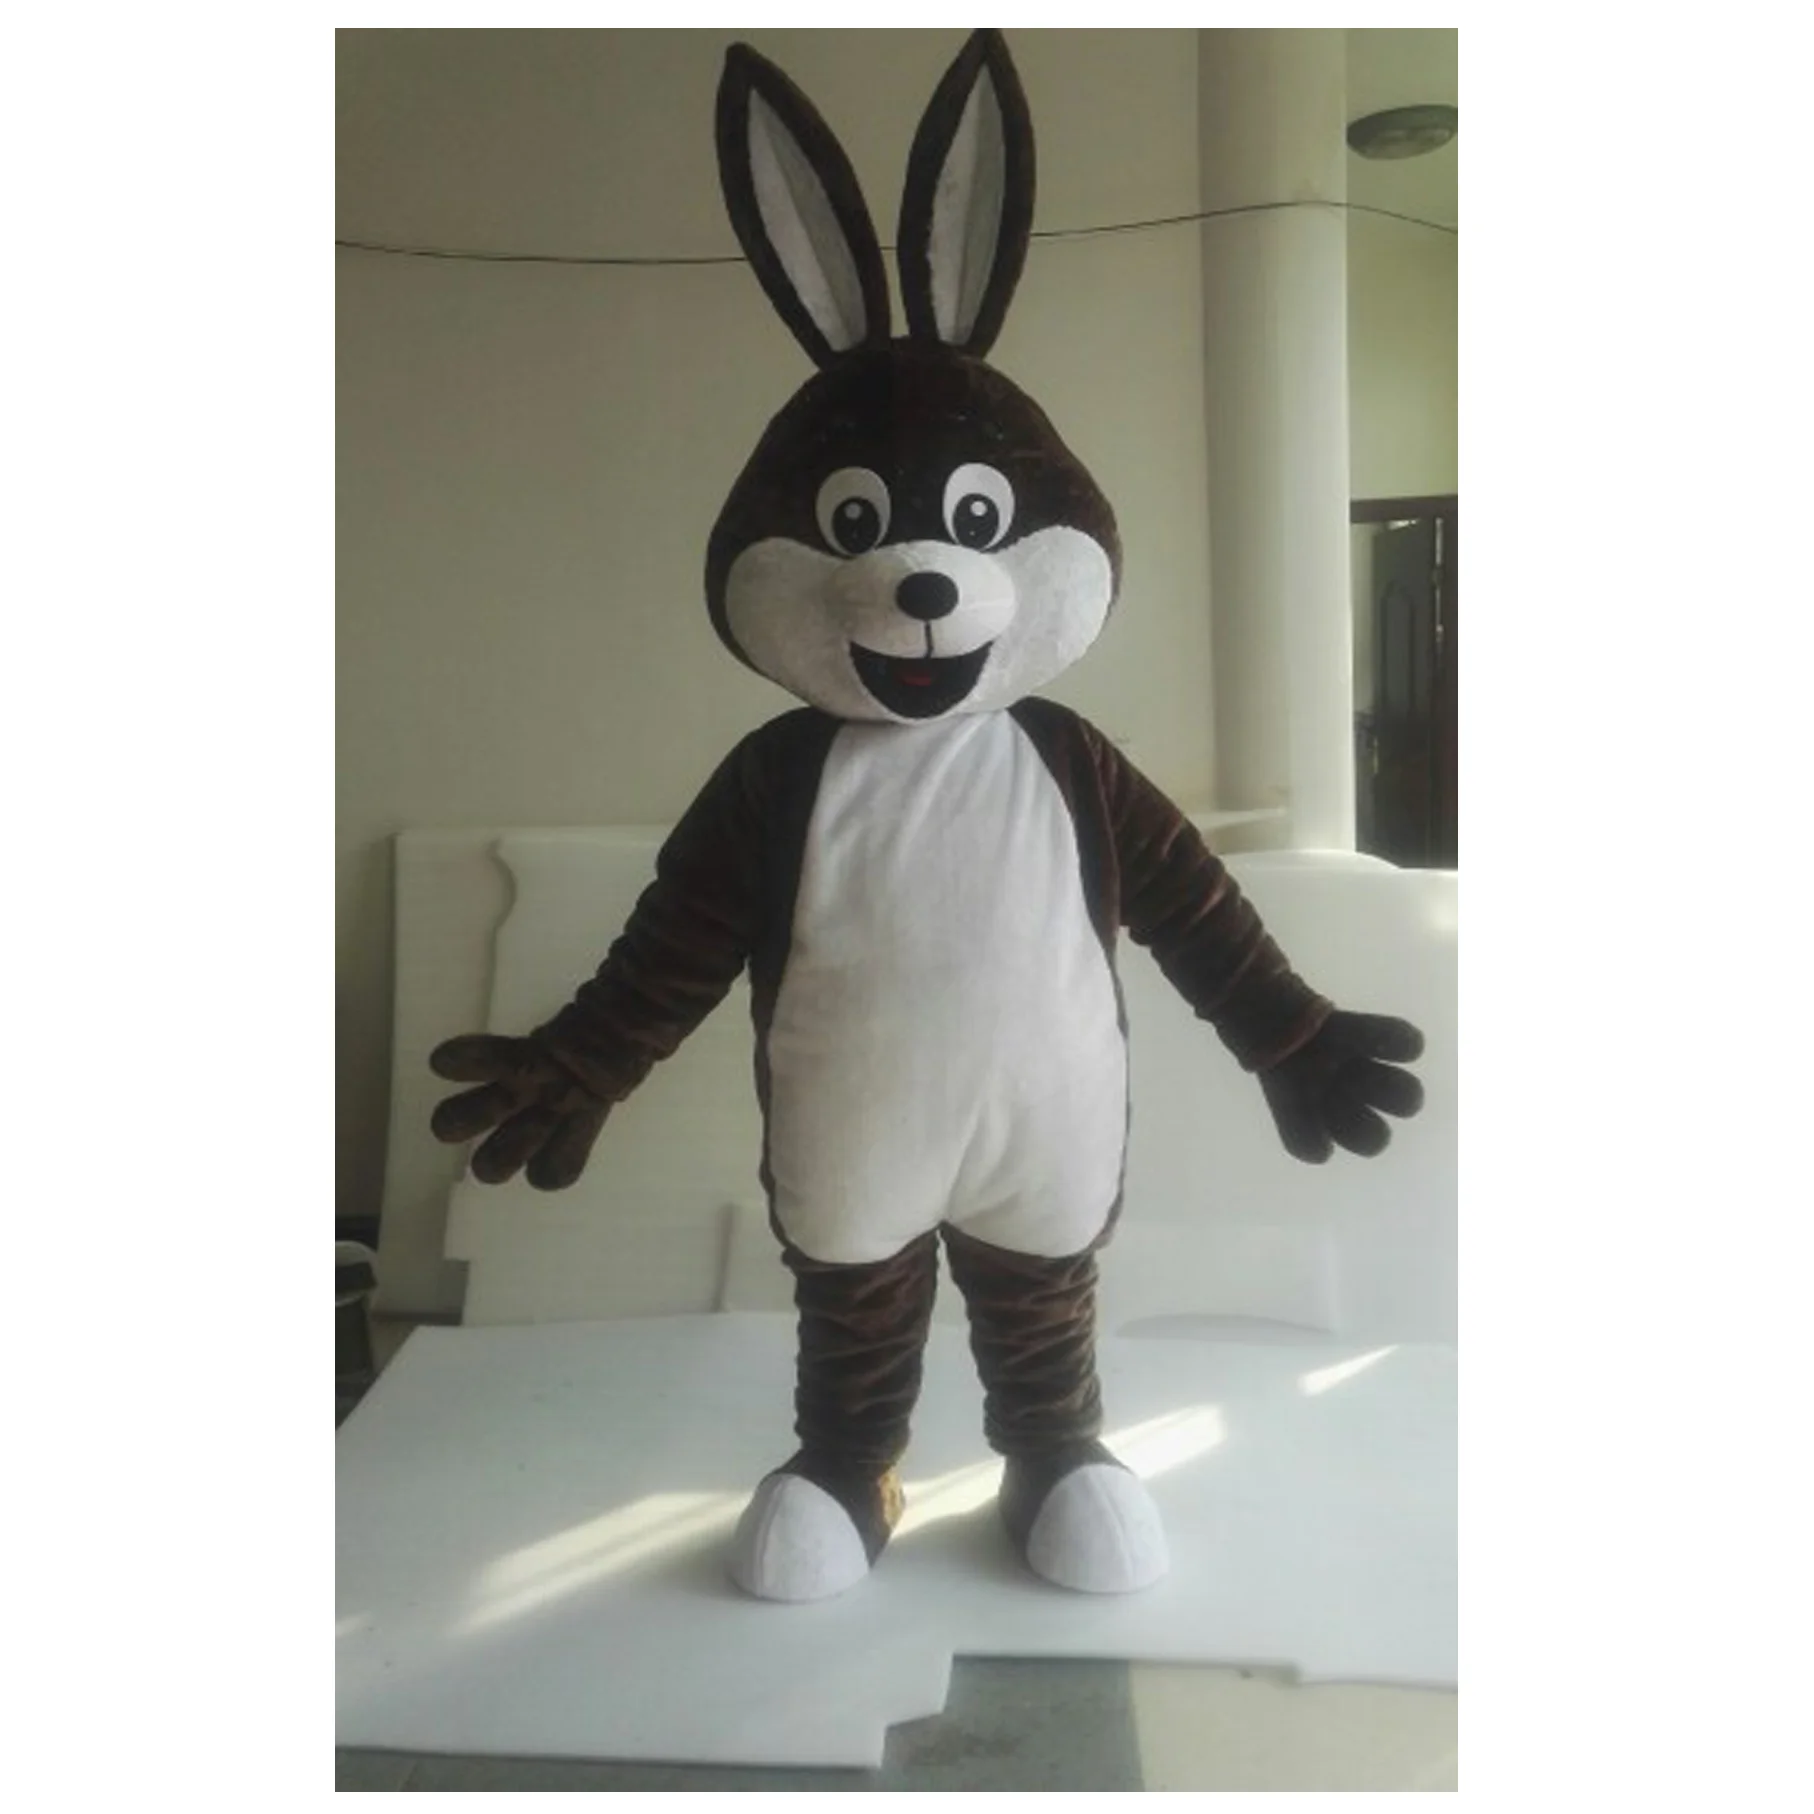 

Free Shipping! Festival Dress Adult Bunny Costume, Plush Easter Rabbit Mascot For Sale